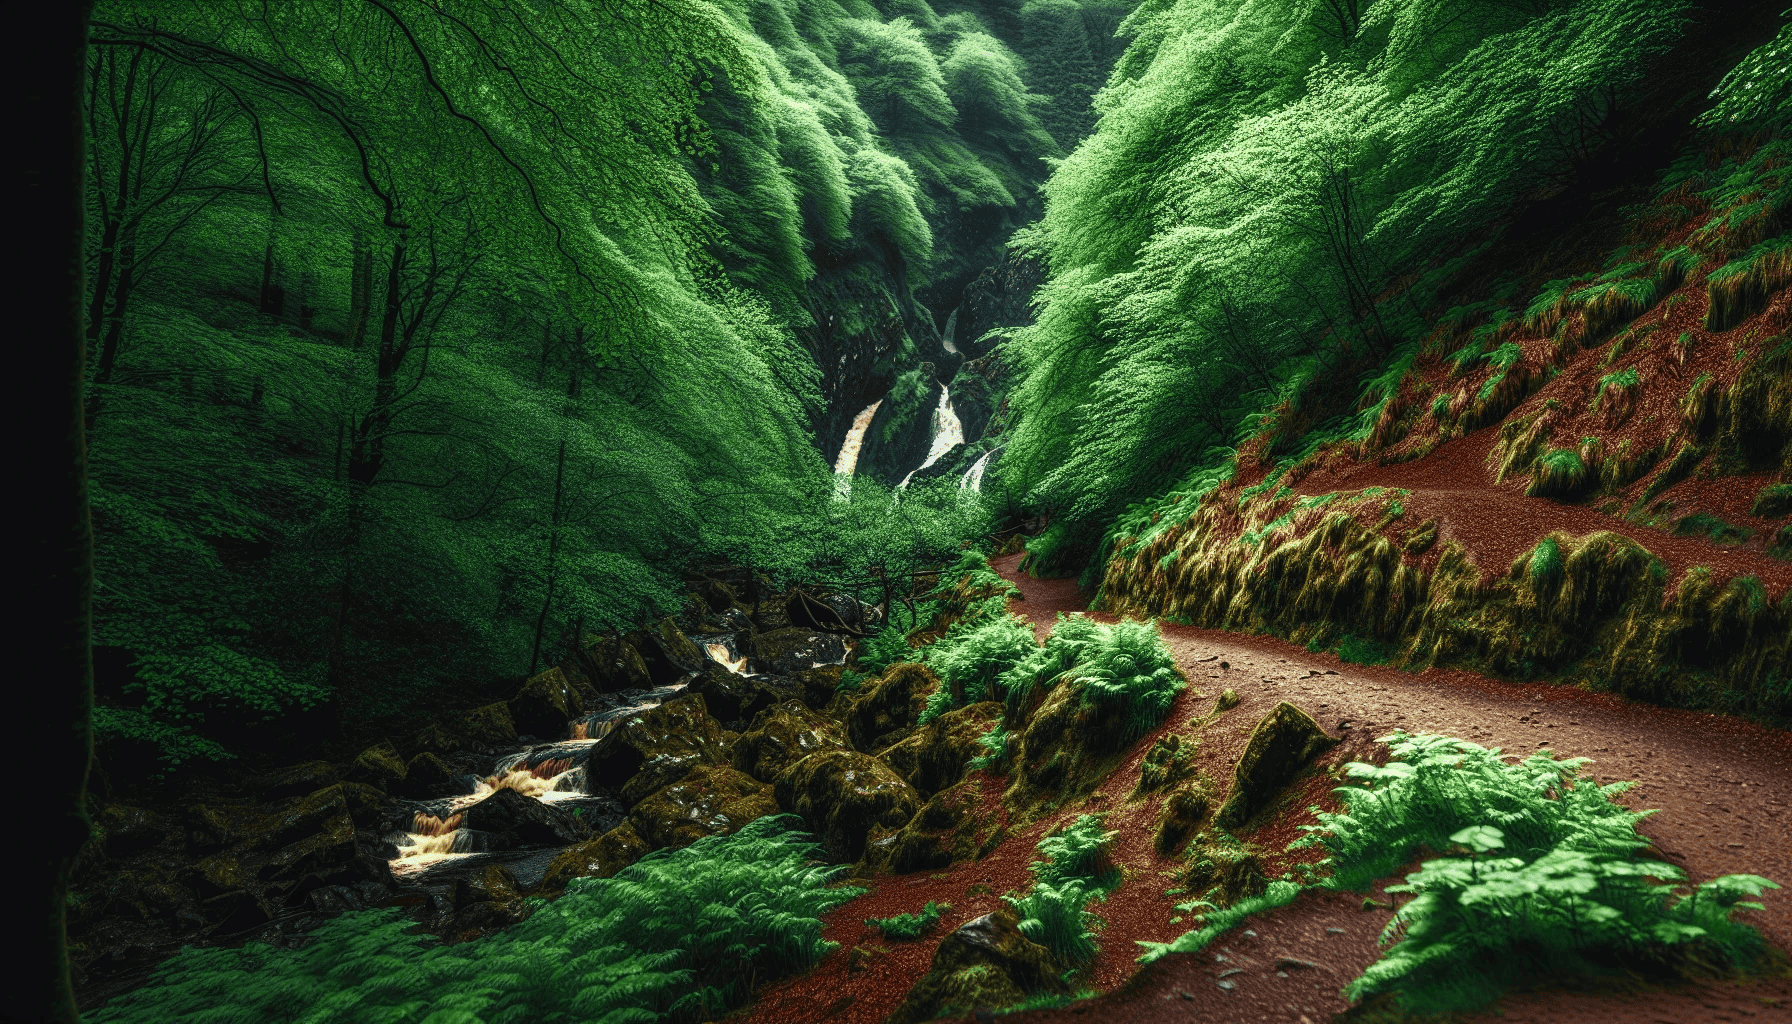 View of the hiking trails in Glenariff Forest Park with lush greenery and waterfalls